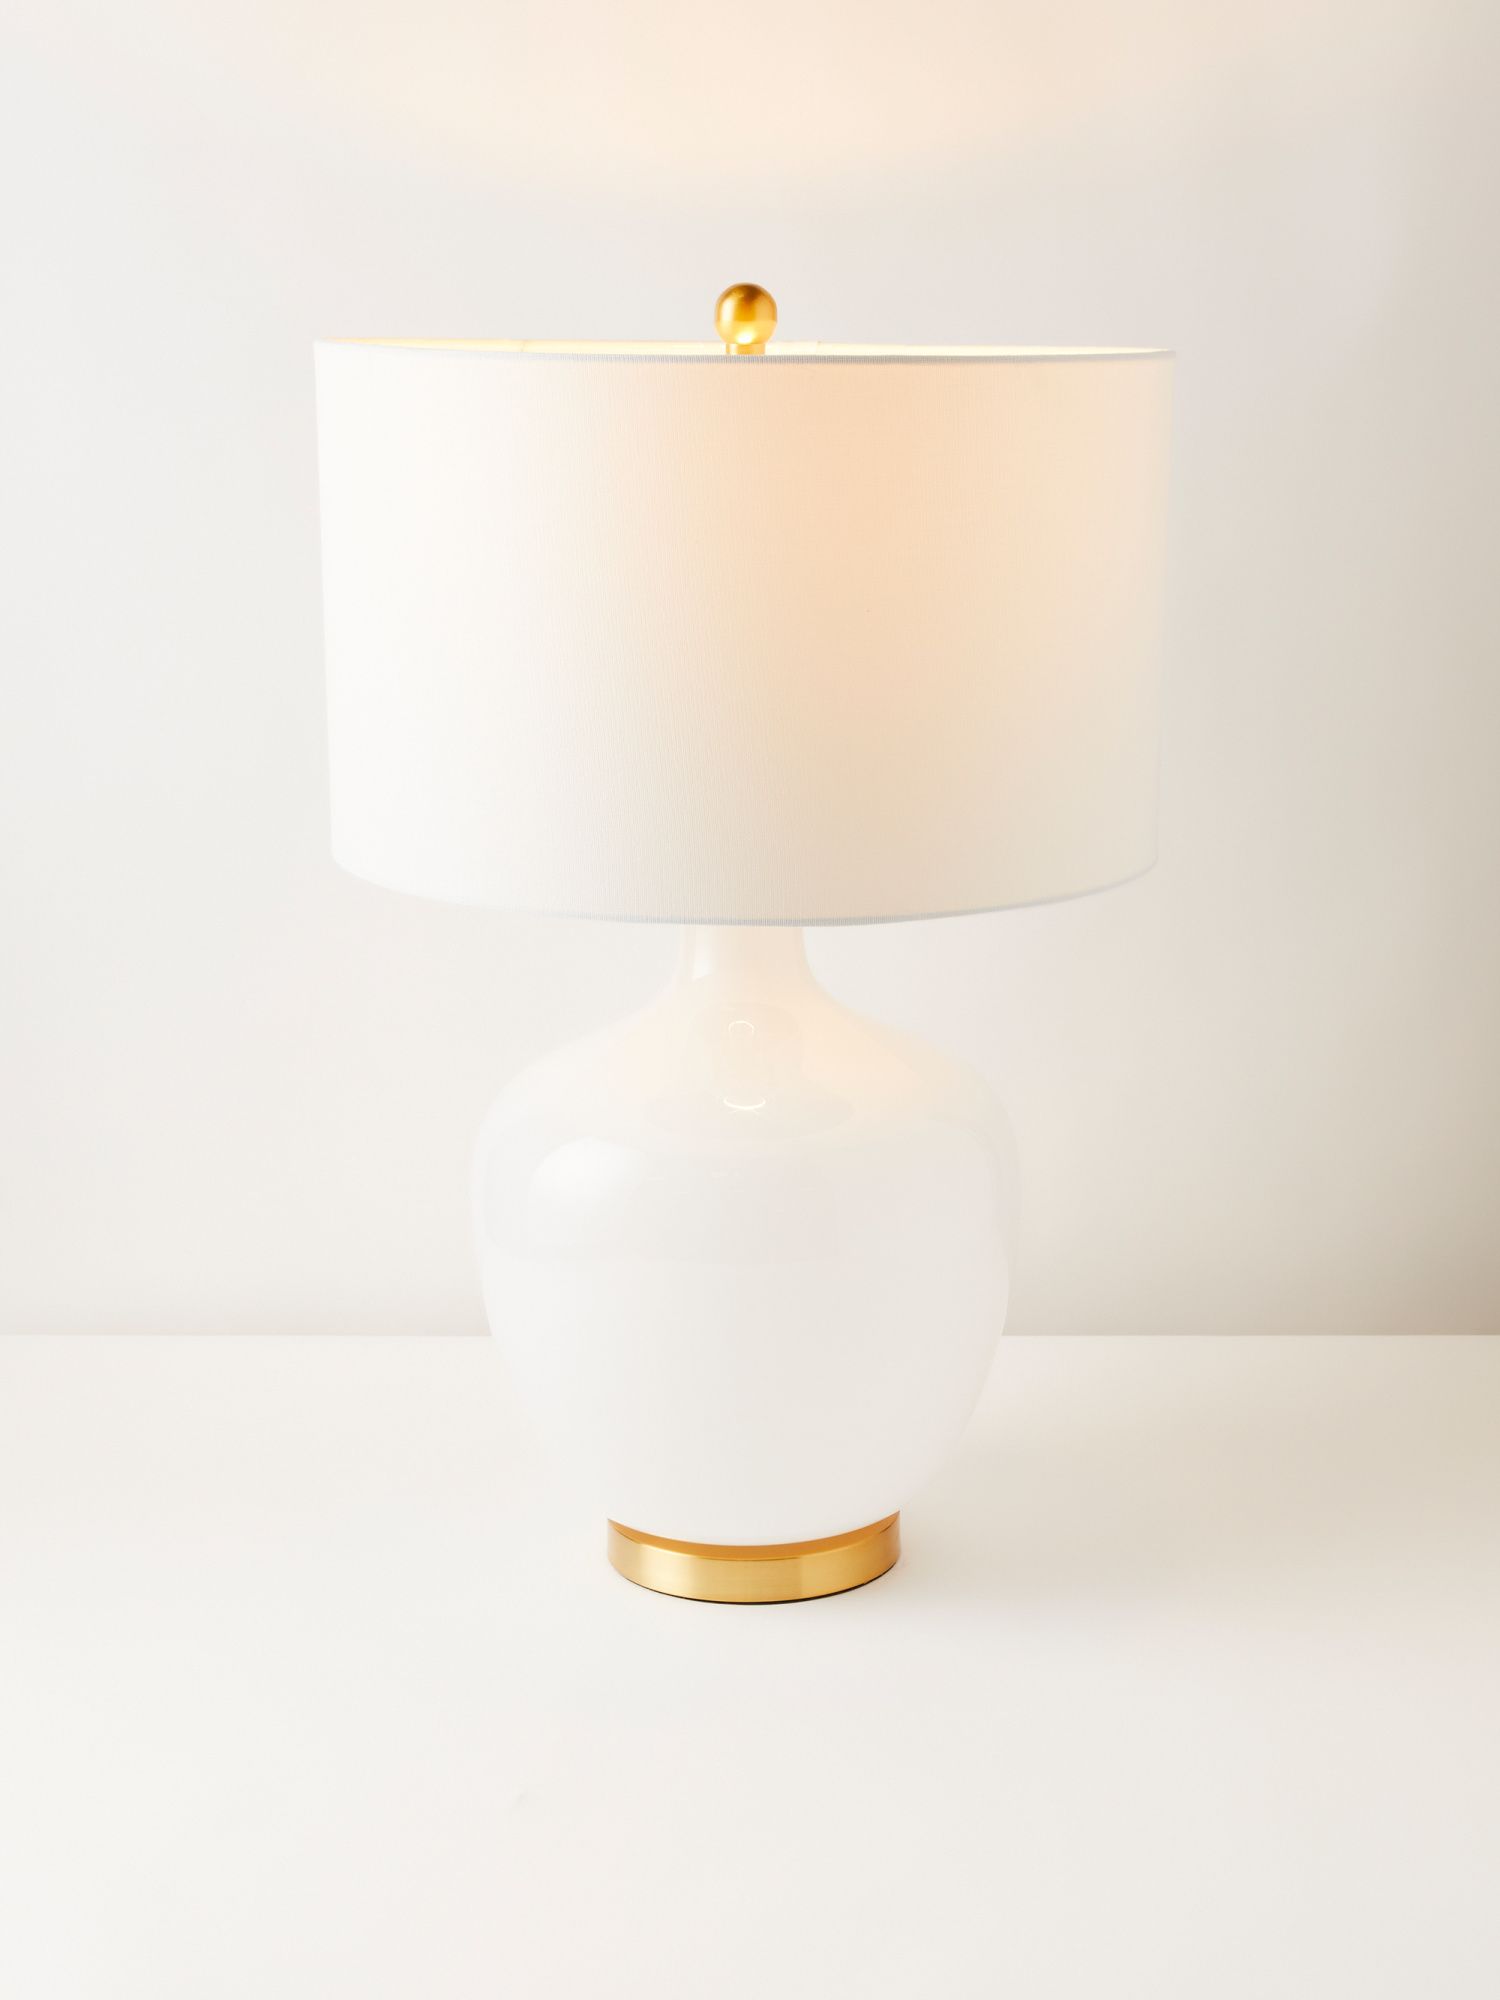 27in Eugenie Glass Table Lamp | Table Lamps | HomeGoods | HomeGoods